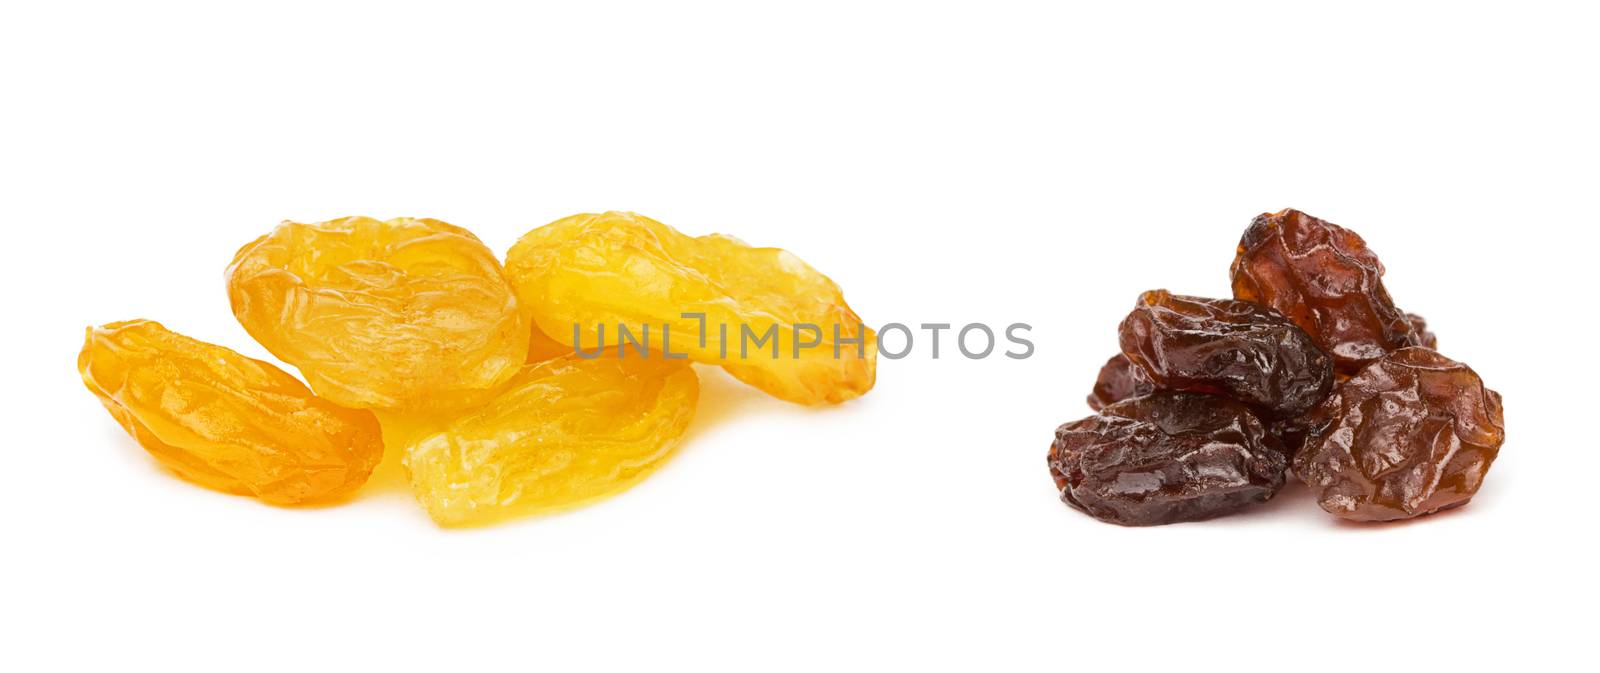 Dried apricots with dates on a white background by ozaiachin